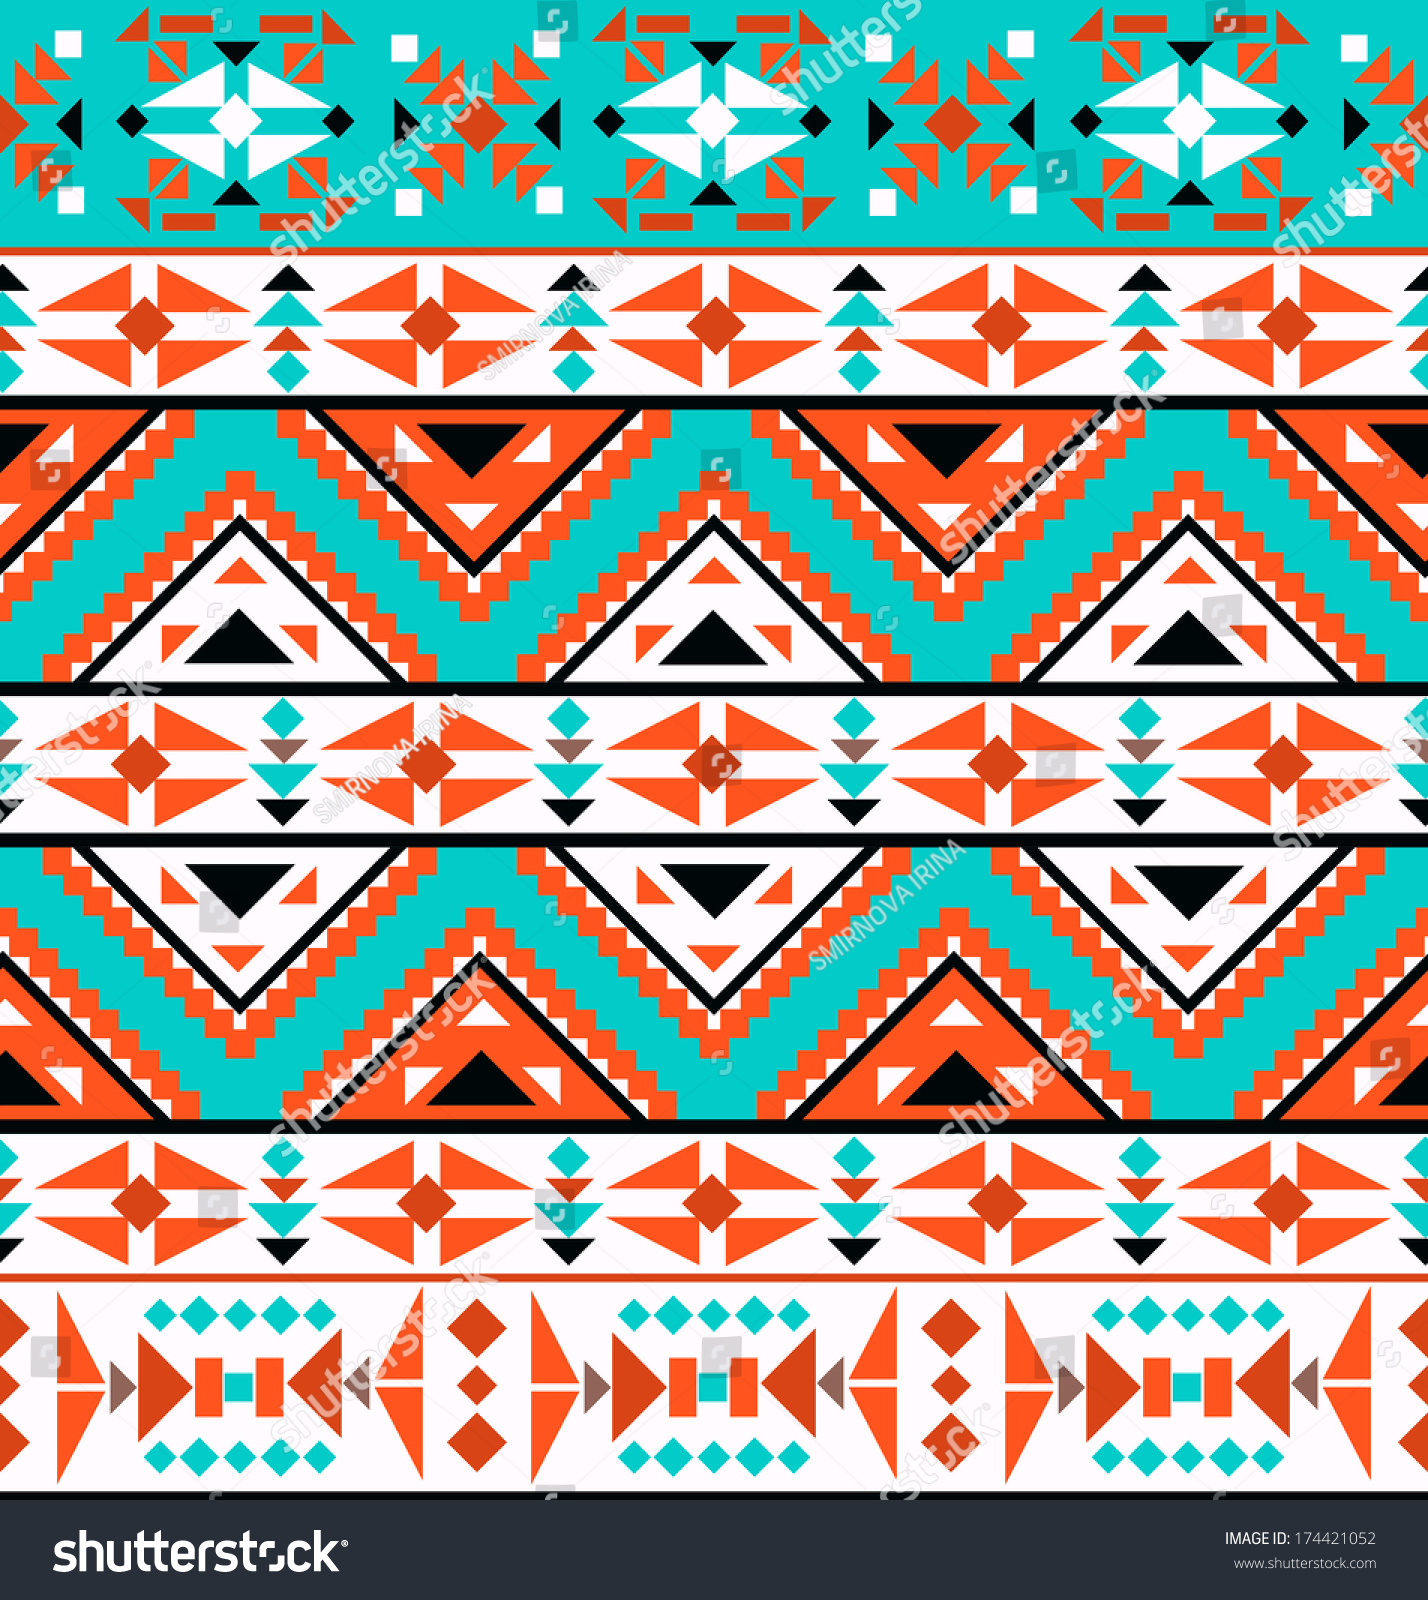 Seamless Colorful Aztec Pattern Stock Vector Illustration 174421052 ...